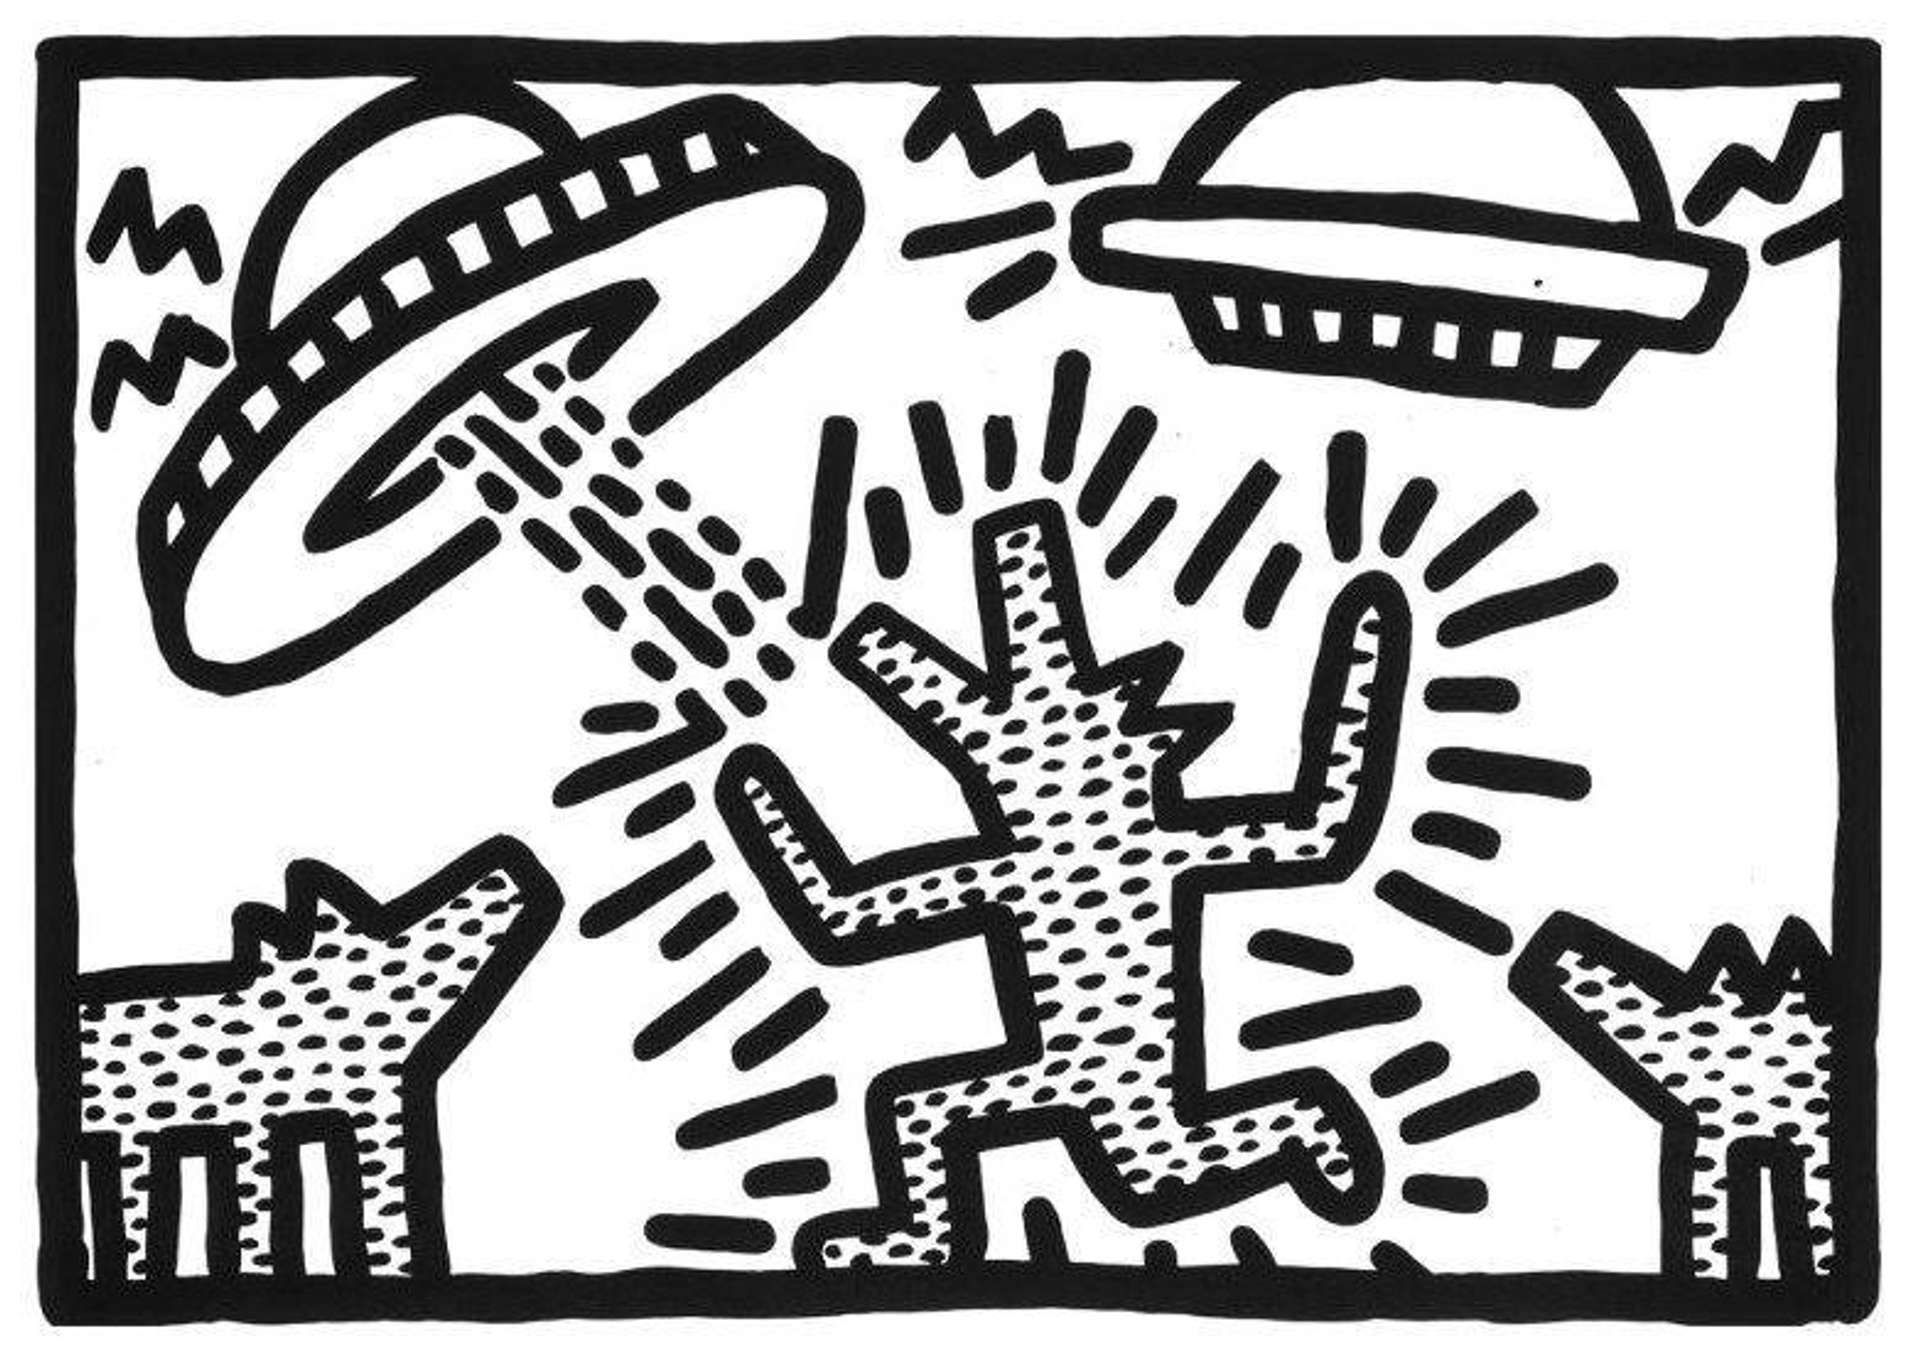 Keith Haring: Untitled (Dogs With Ufos) - Signed Print